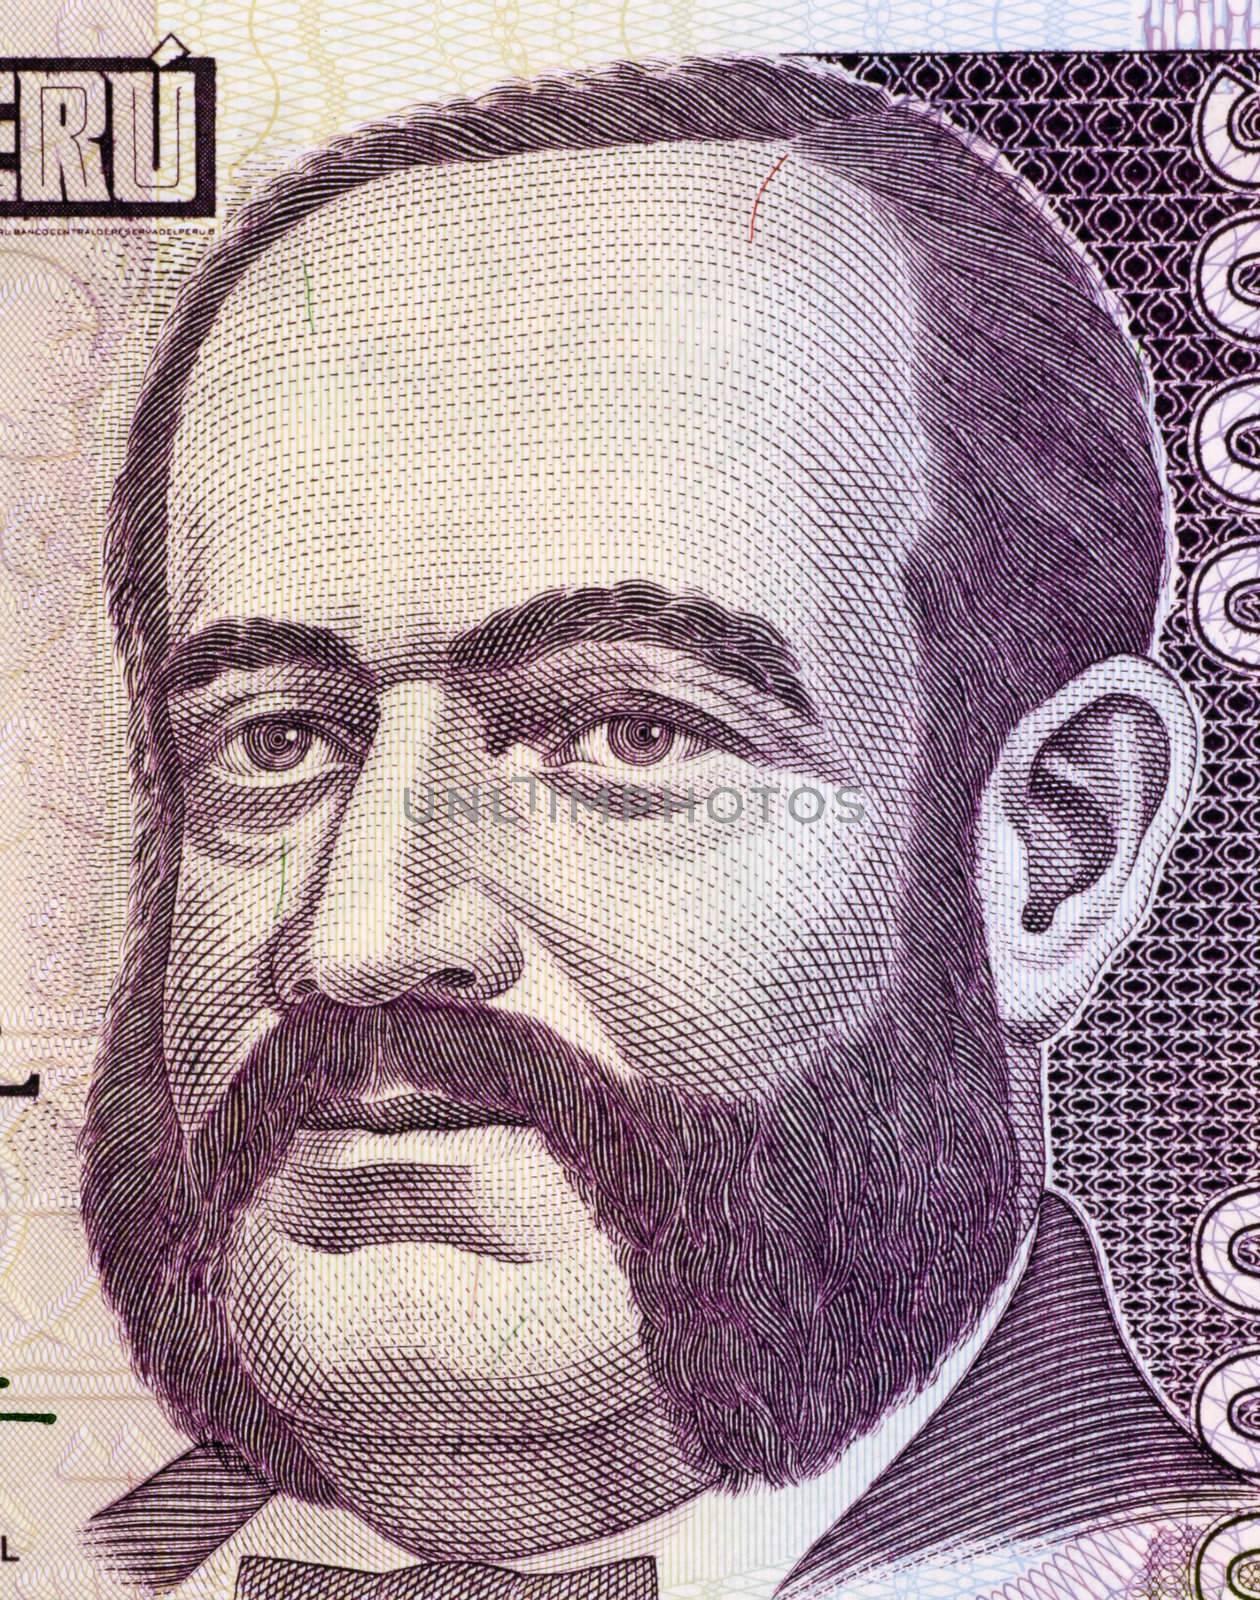 Admiral Miguel Grau on 5000 Indis 1988 Banknote from Peru. Naval officer and hero of the battle of Angamos in the war of the pacific during 1879-1884. One of the most famous military leaders of America.